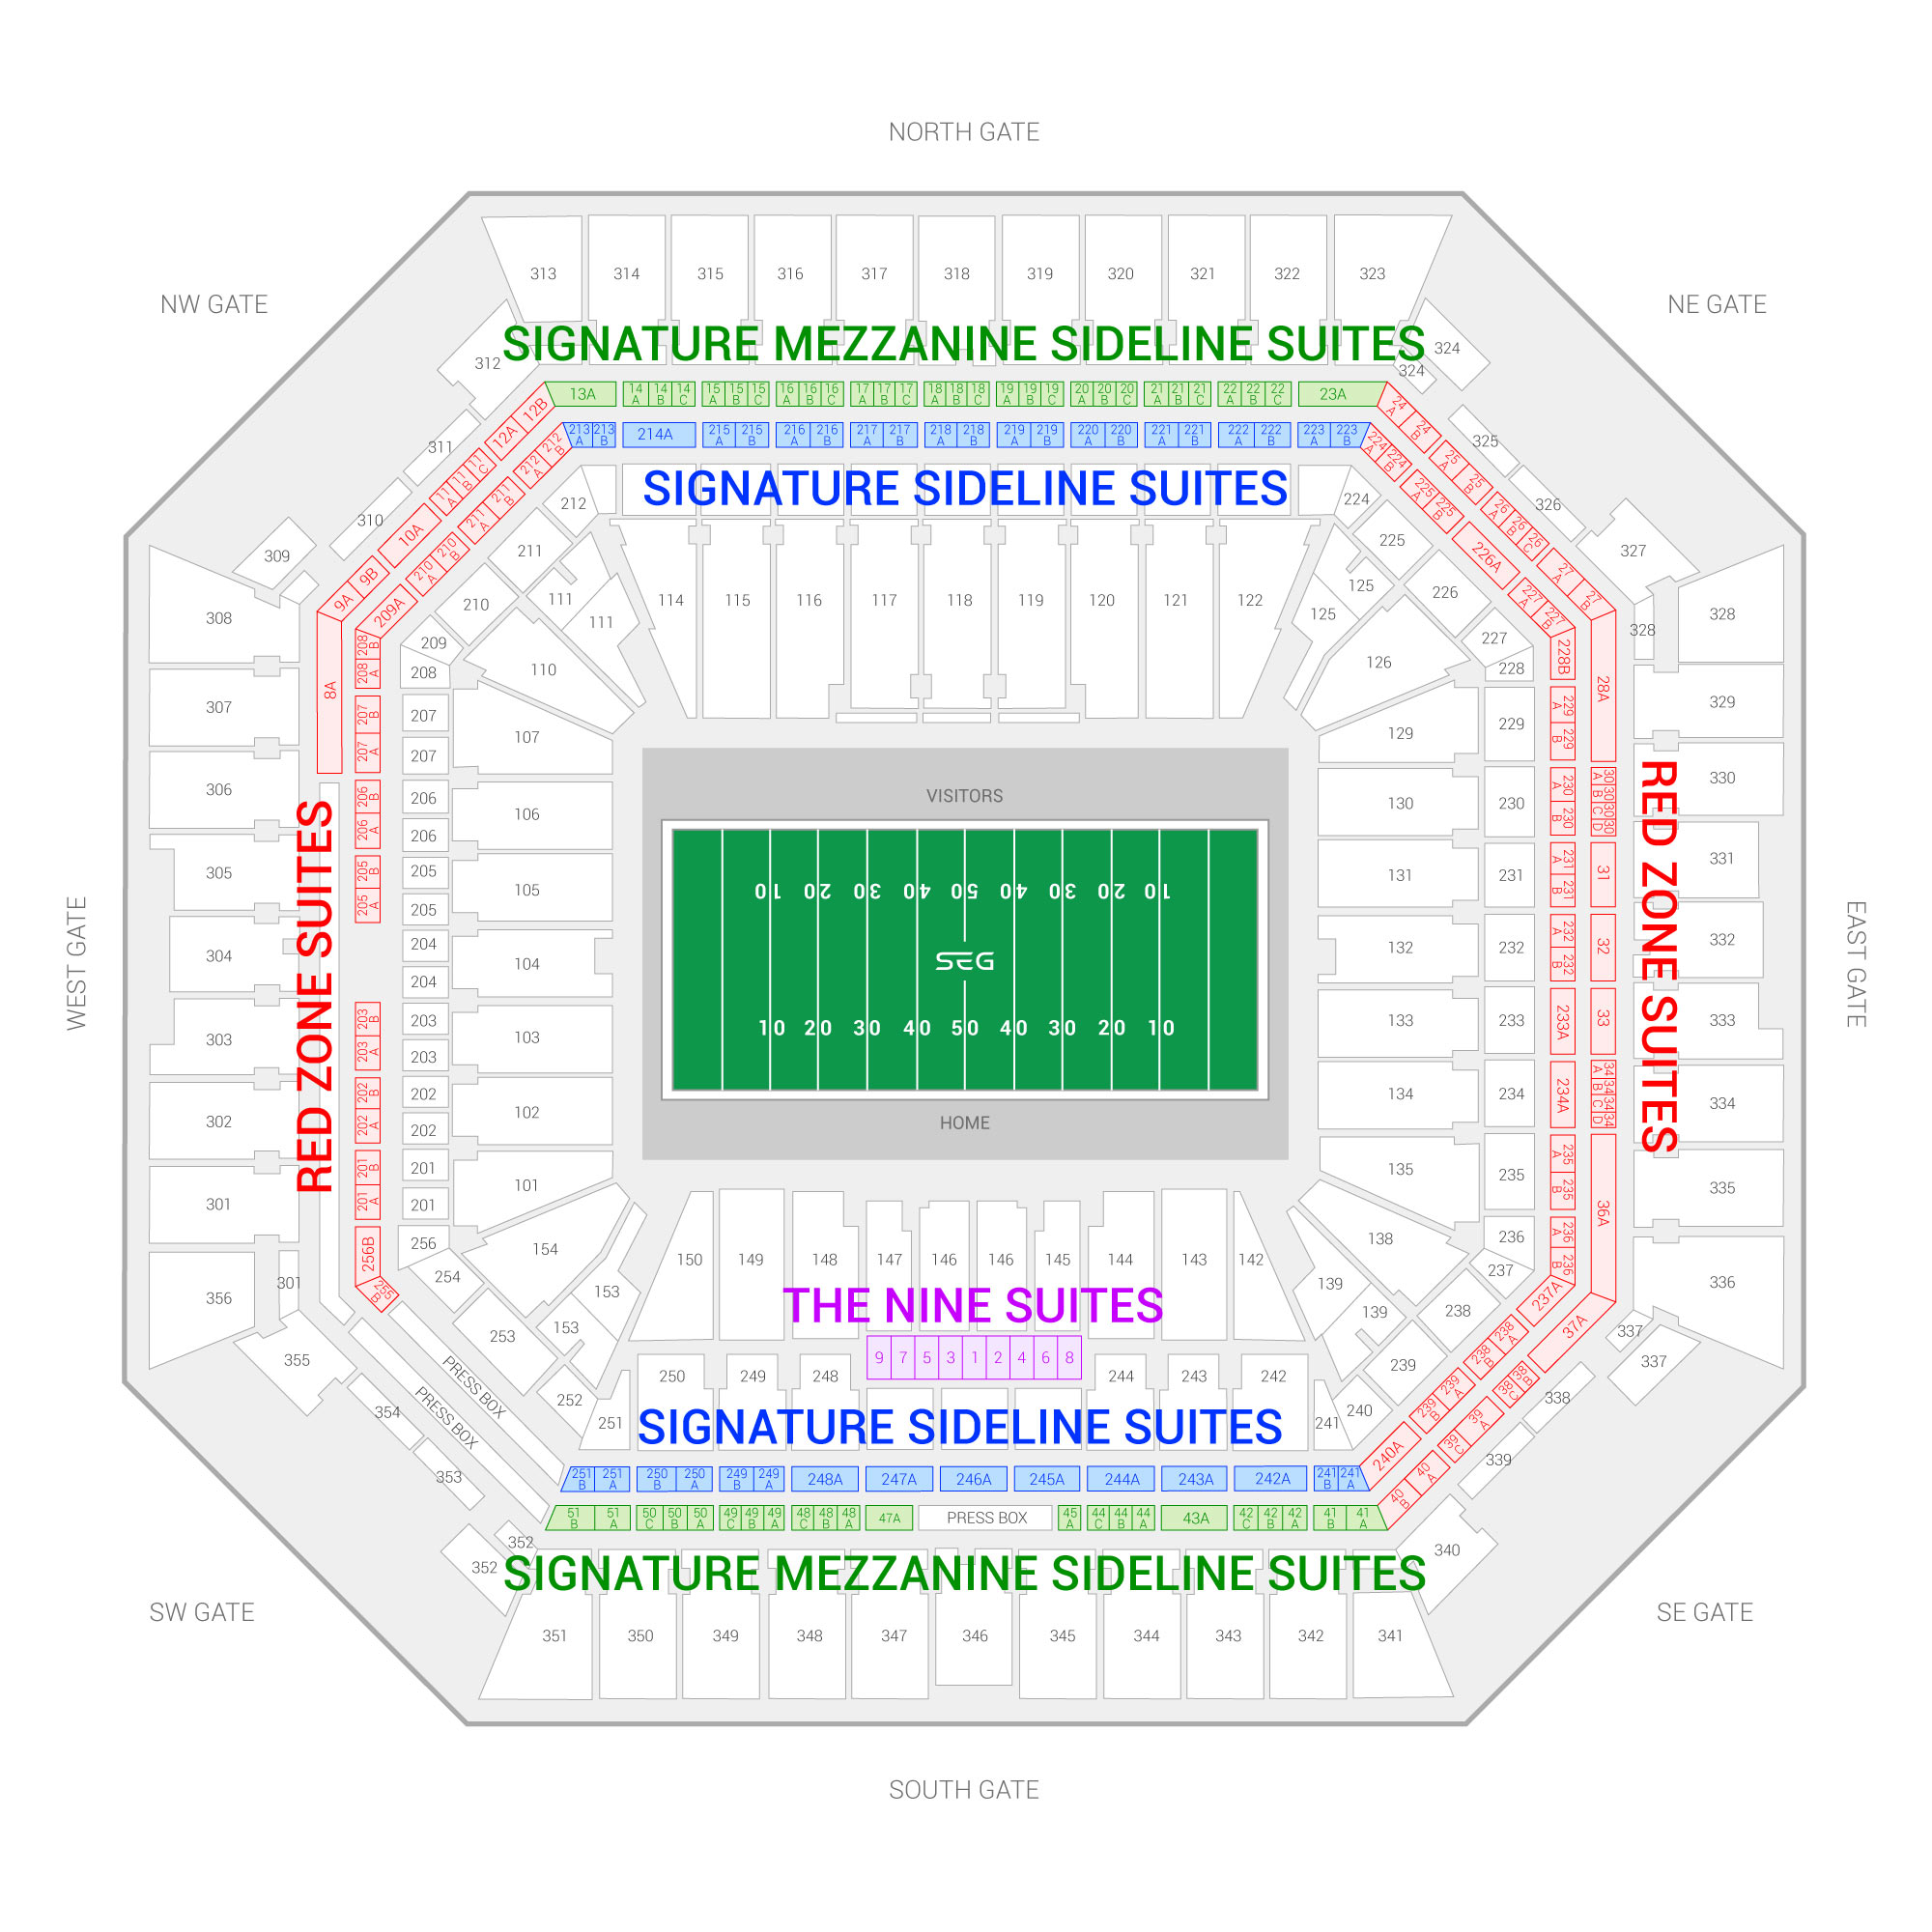 cost of front row seats at super bowl